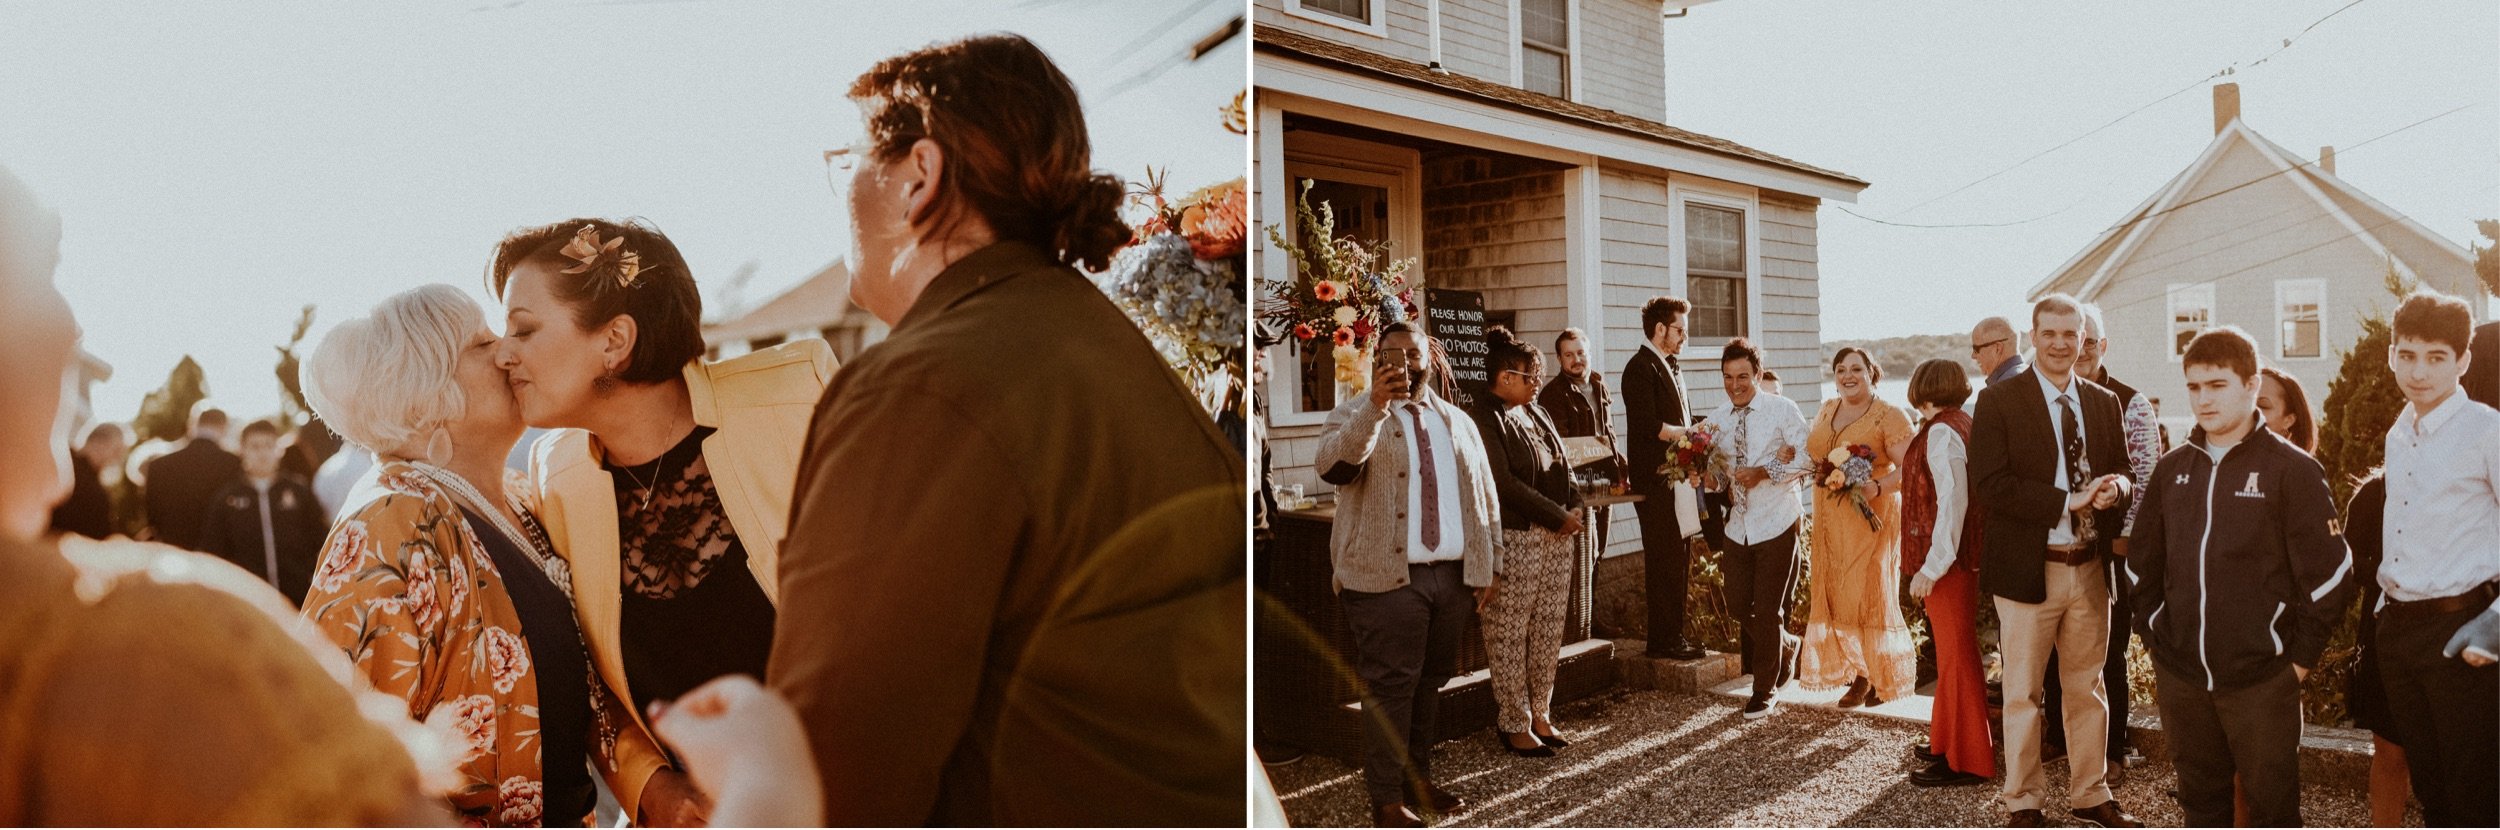 59_Colorful Intimate LGBTQ Wedding in Rockport MA - Vanessa Alves Photography.jpg